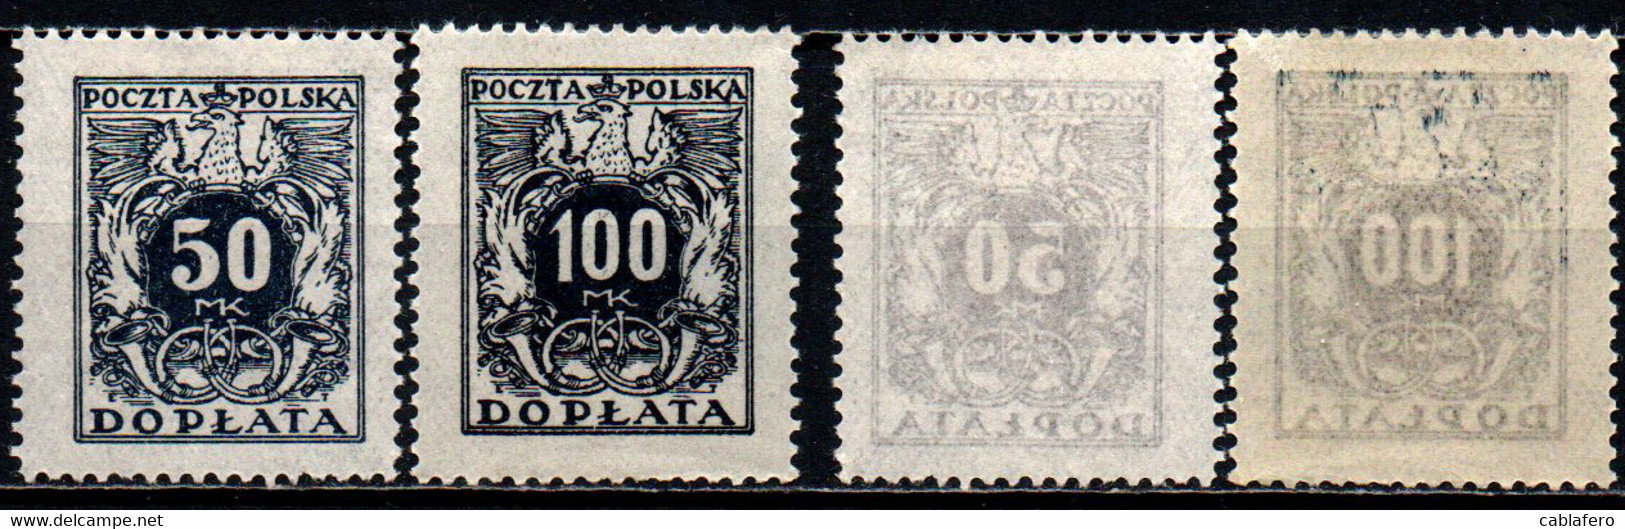 POLONIA - 1921 - CIFRE - MH - Postage Due